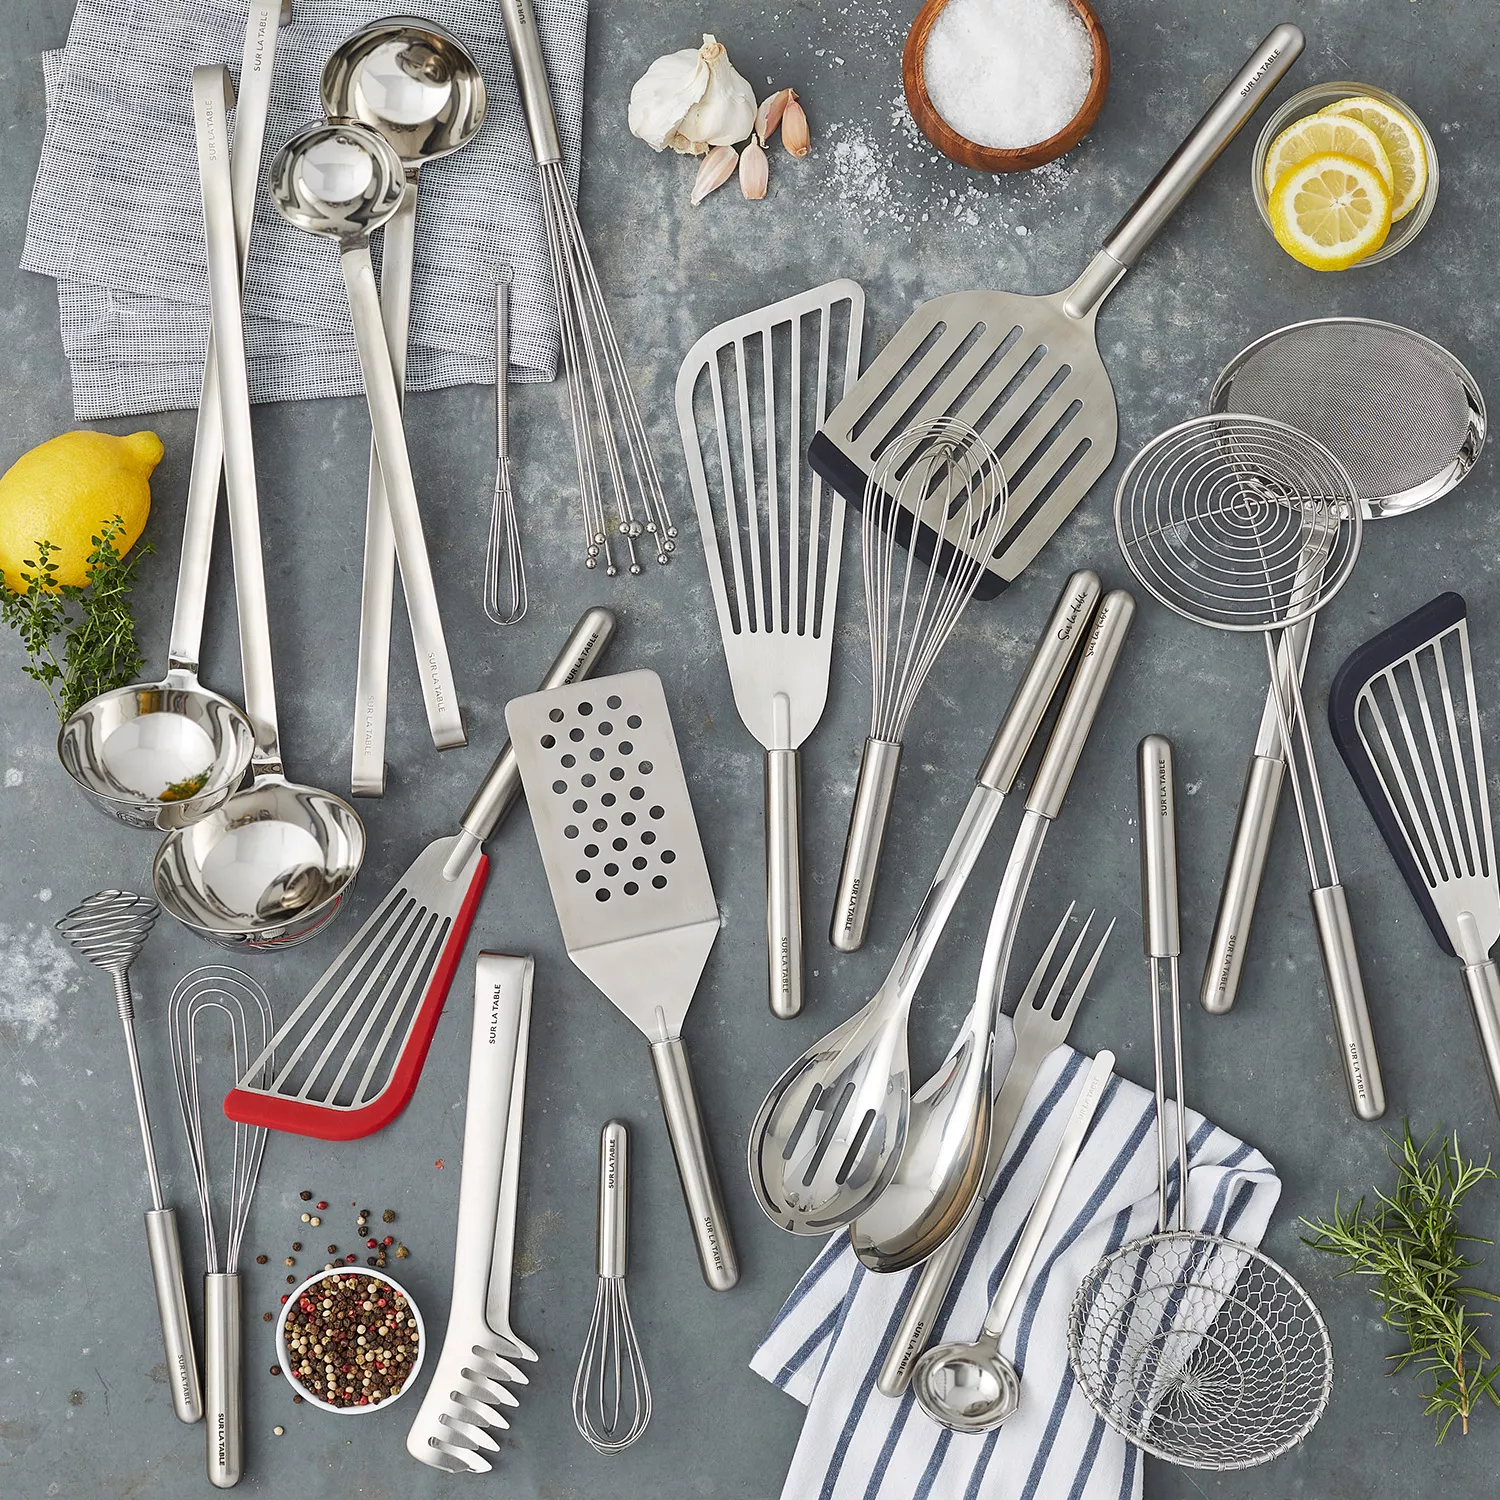  Cooking Utensils: Home & Kitchen: Spatulas, Tongs, Utensil  Sets, Whisks, Cooking Spoons, Ladles & More